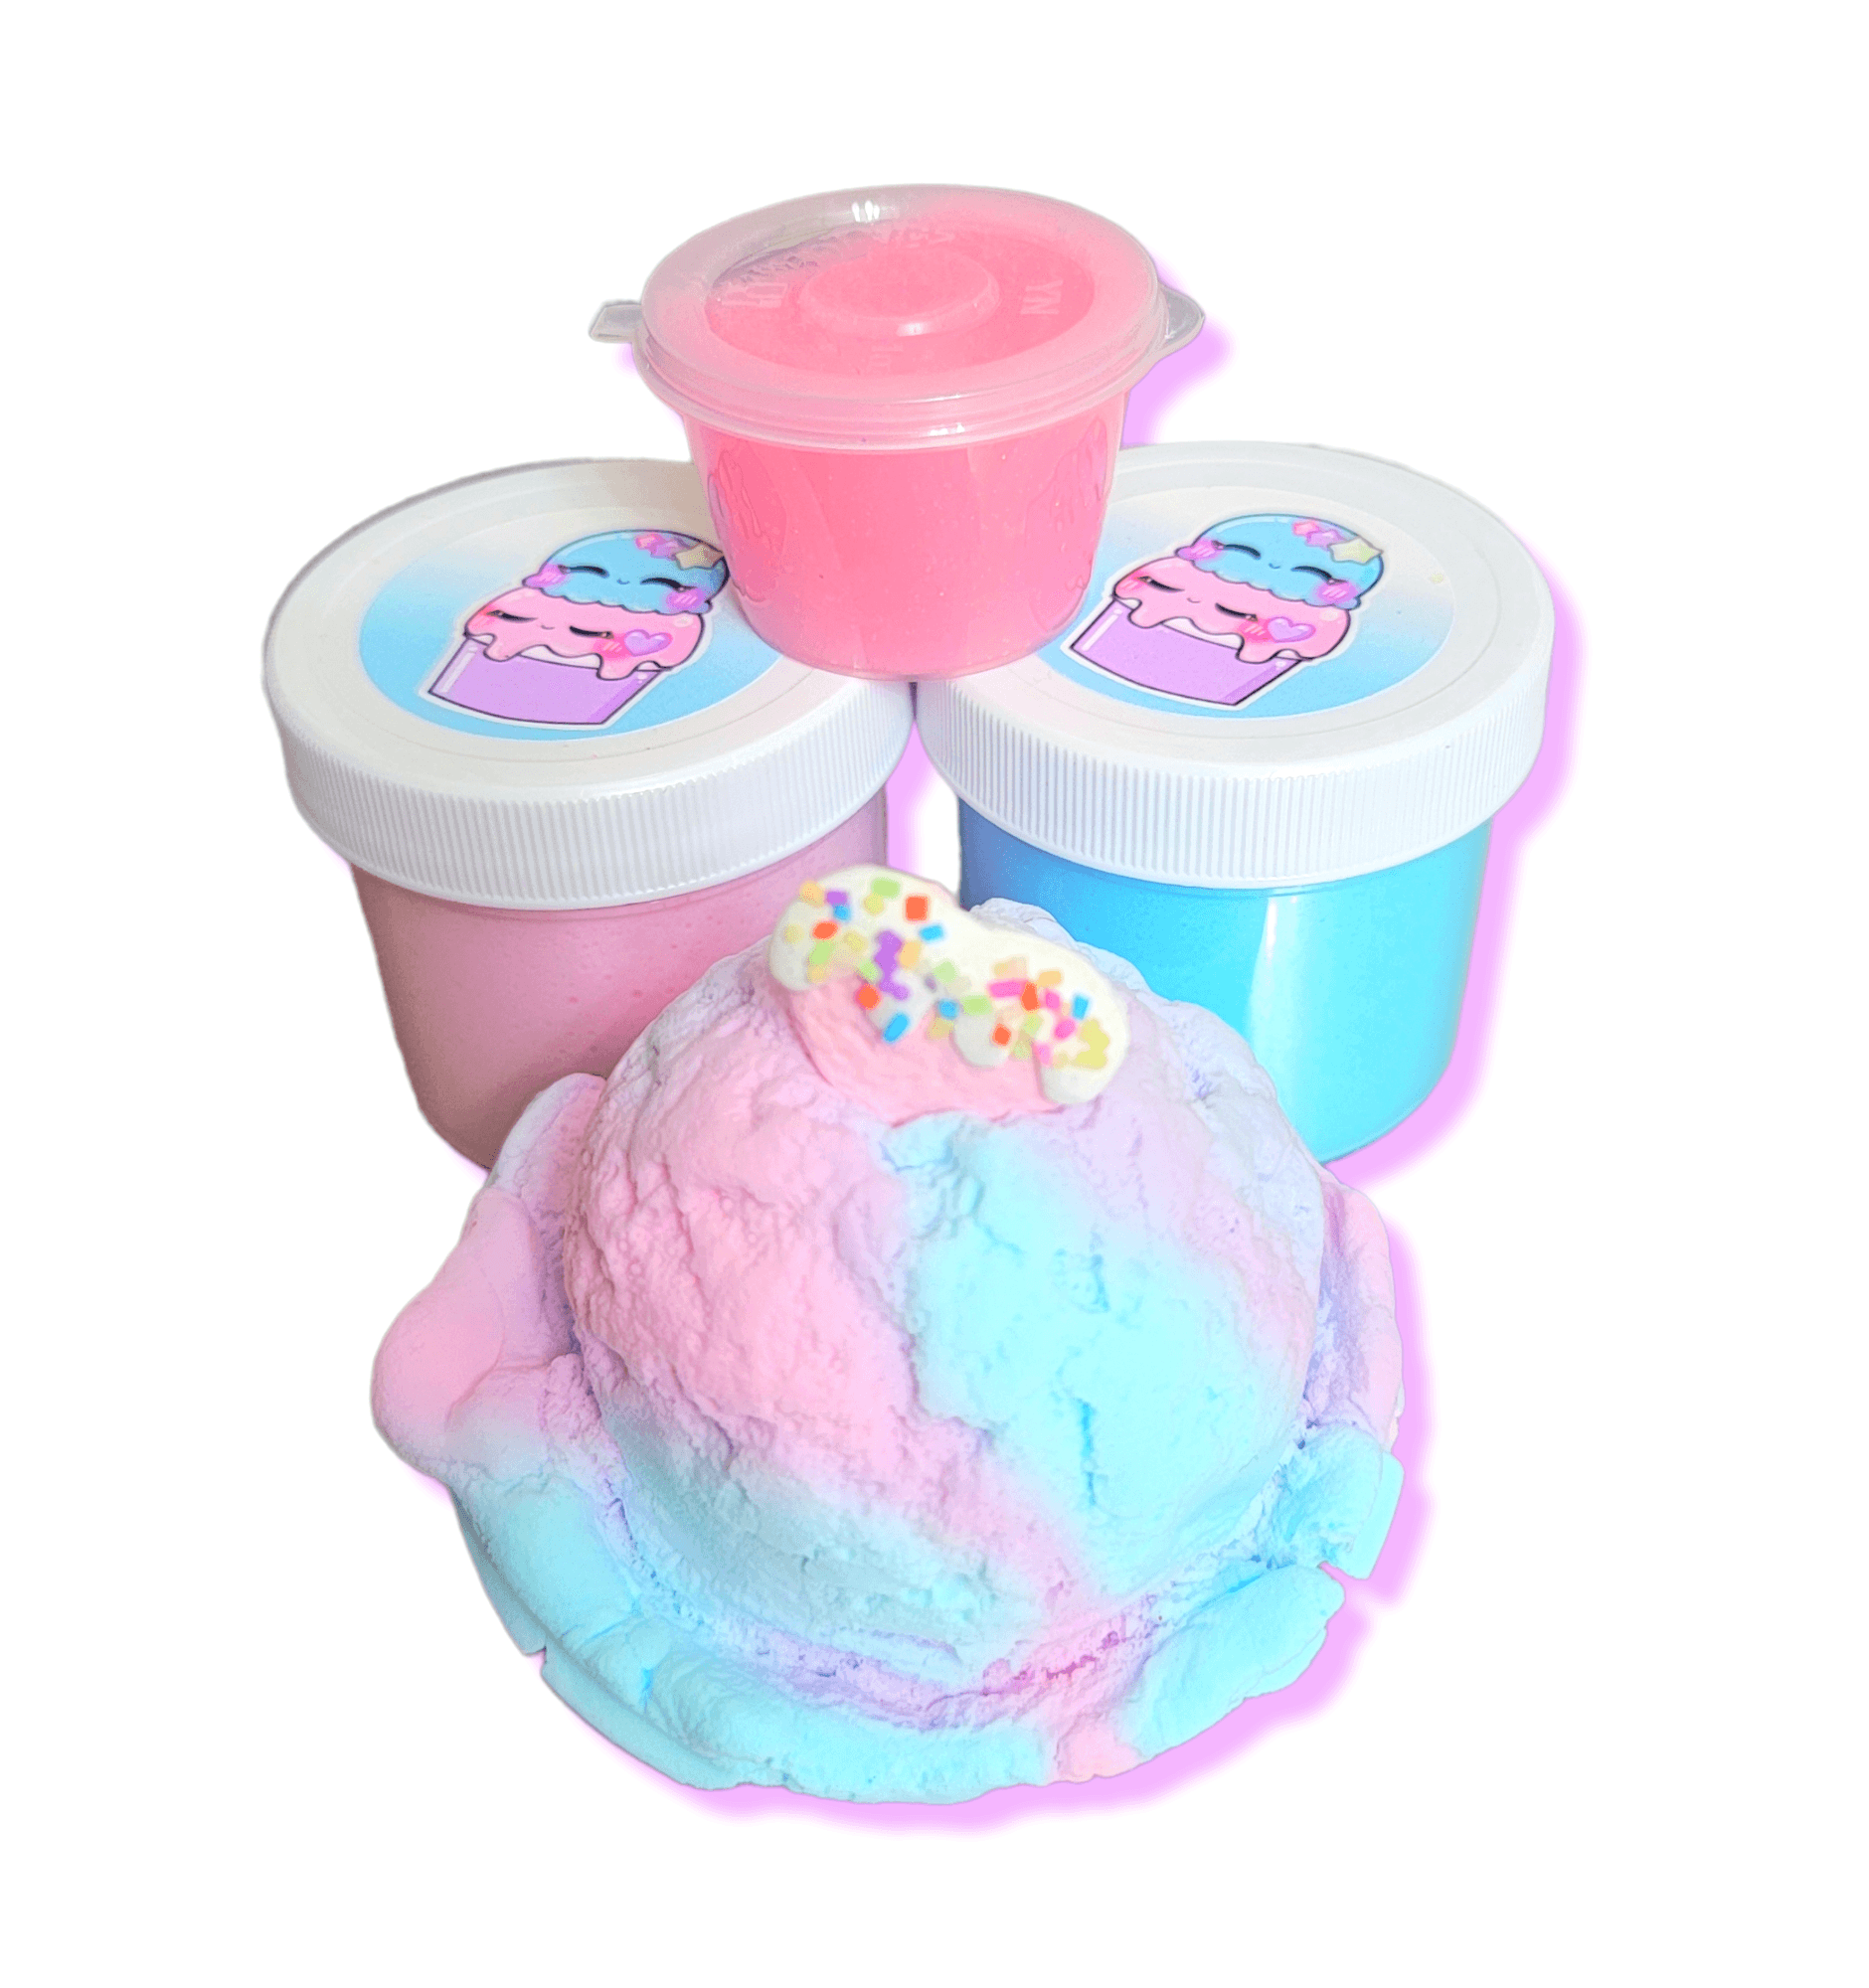 Cotton Candy Ice cream Scoops DIY Slime Kit Slime by Hoshimi Slimes LLC | Hoshimi Slimes LLC